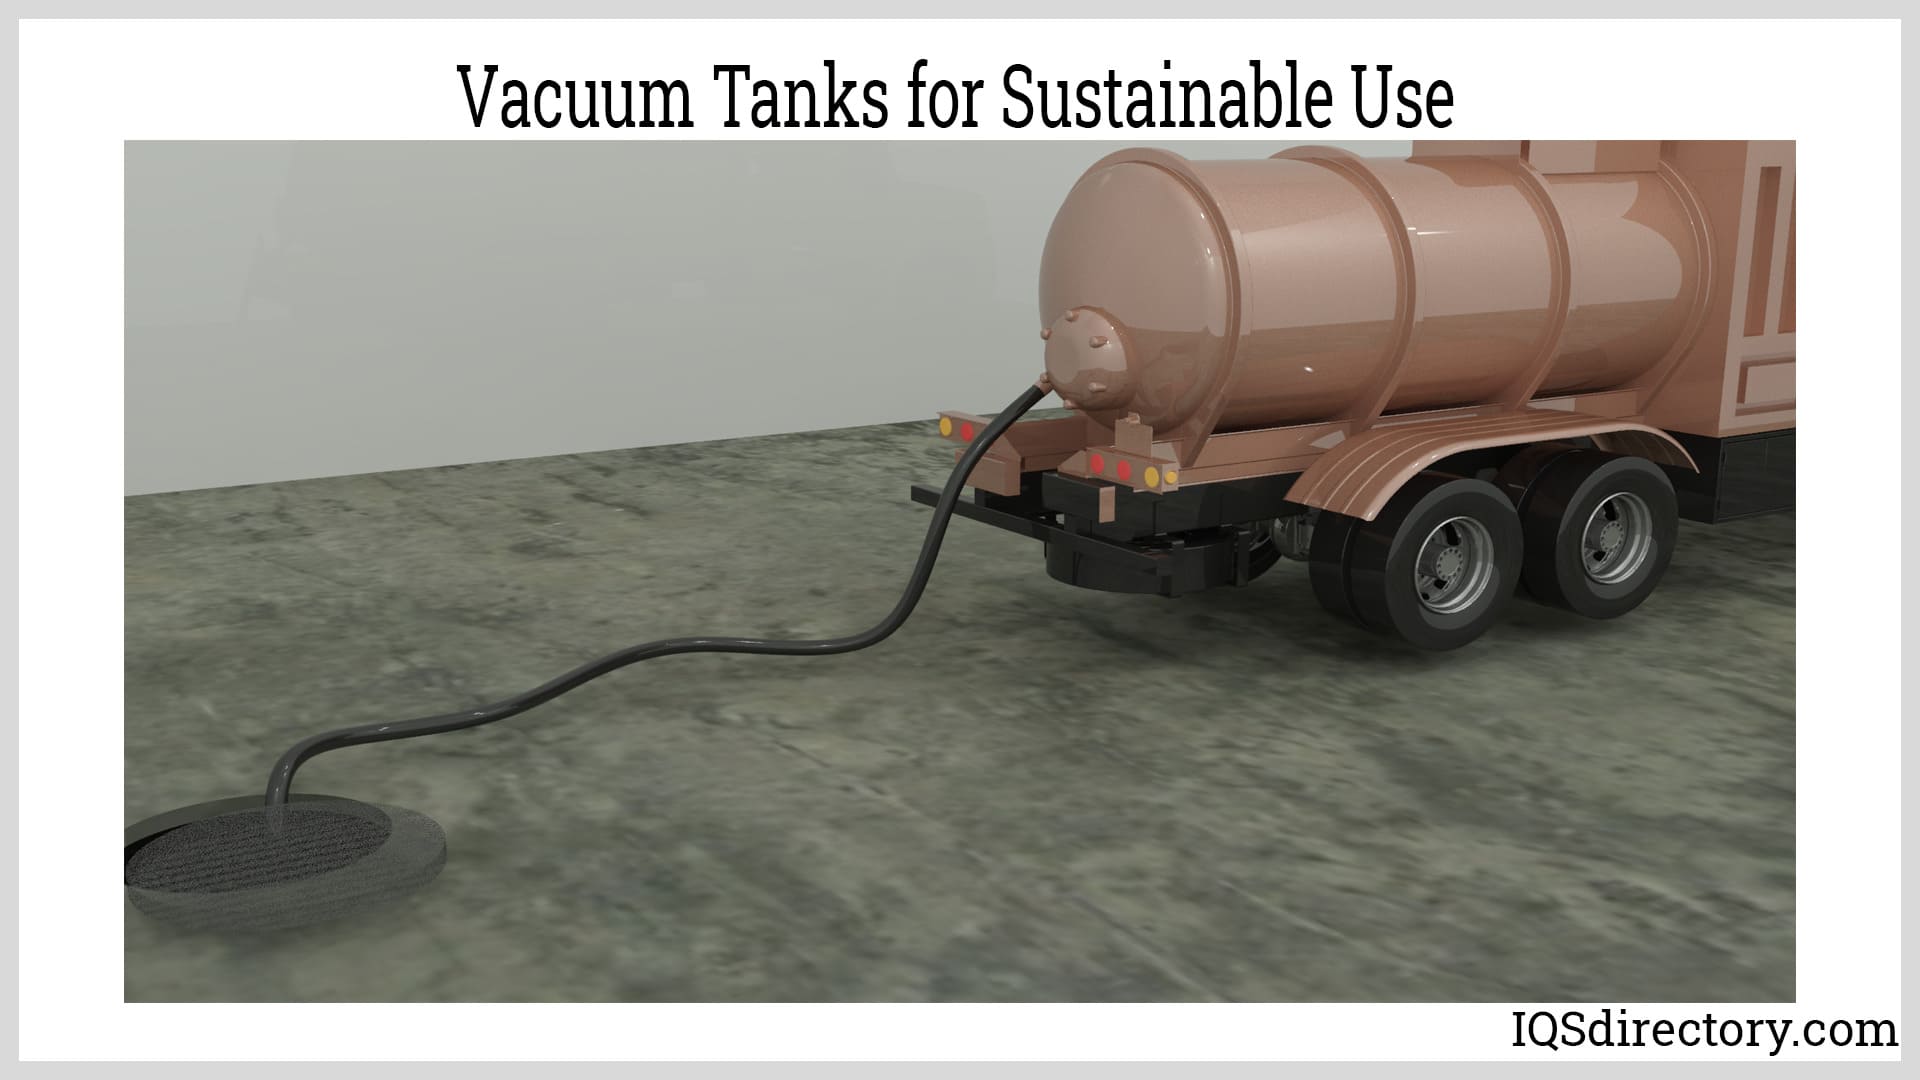 Vacuum Tanks for Sustainable Use